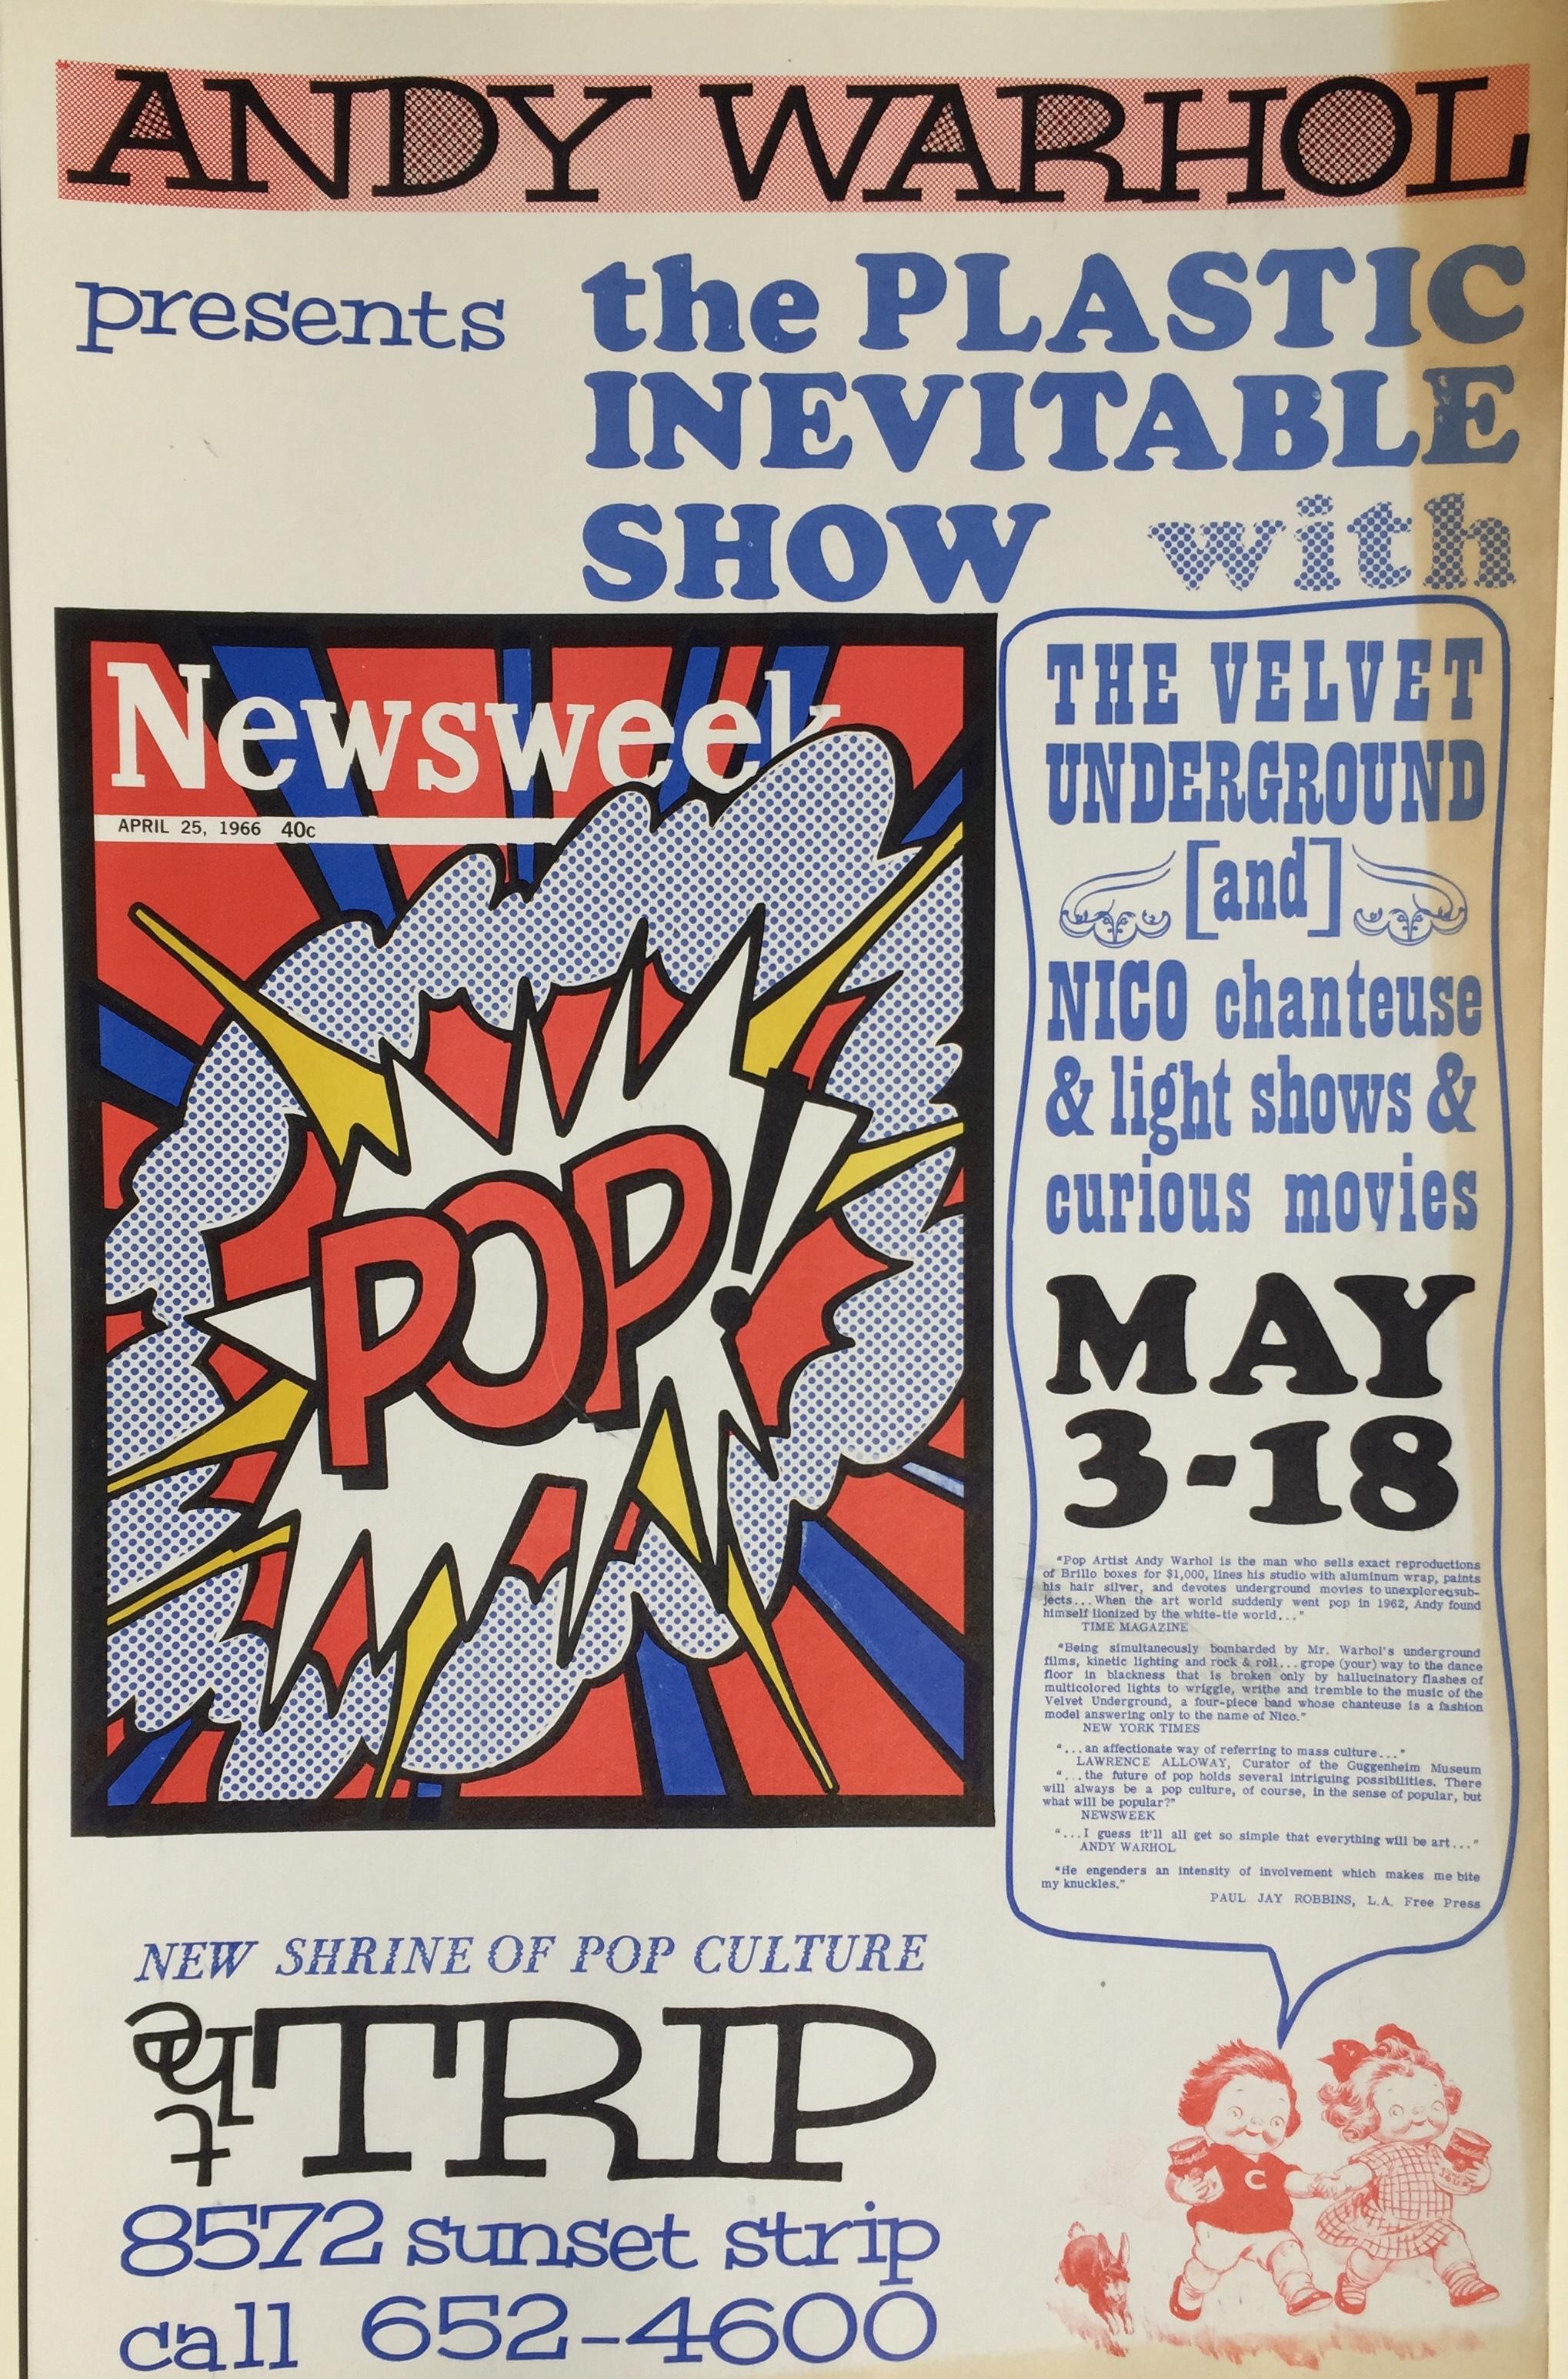 ANDY WARHOL 1966 POP CULTURE ICONIC POSTER

ANDY WARHOL Presents the PLASTIC INEVITABLE SHOW with THE VELVET UNDERGROUND at the “The Trip” Sunset Strip, Los Angeles 1966. Color serigraph, sheet 21 7/8 x 14”. The event was the ultimate confluence of